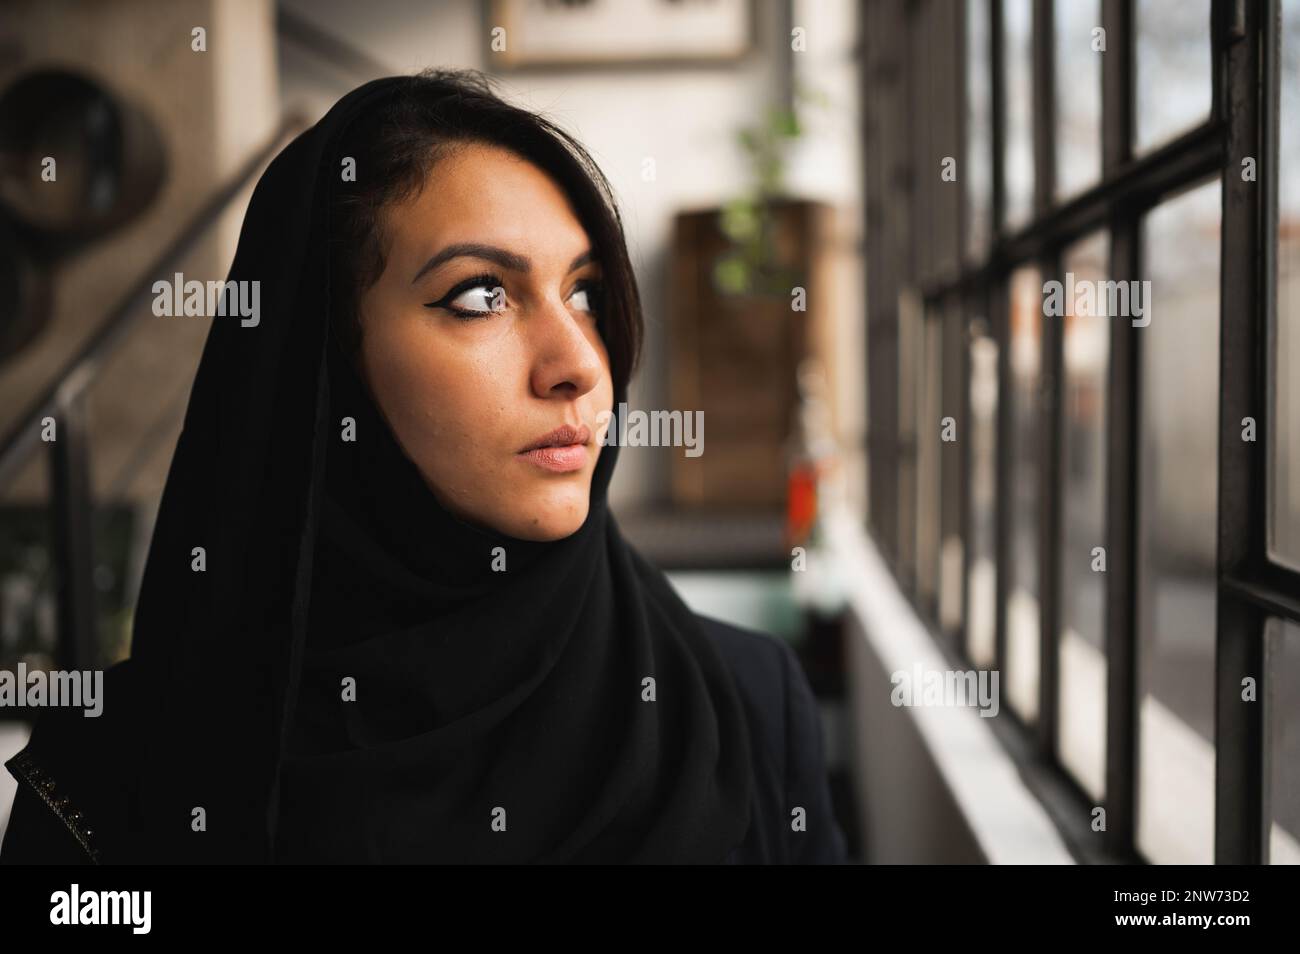 Close-up of young attractive arab woman wearing a black veil. Female profile looking out the window with serious face. Stock Photo